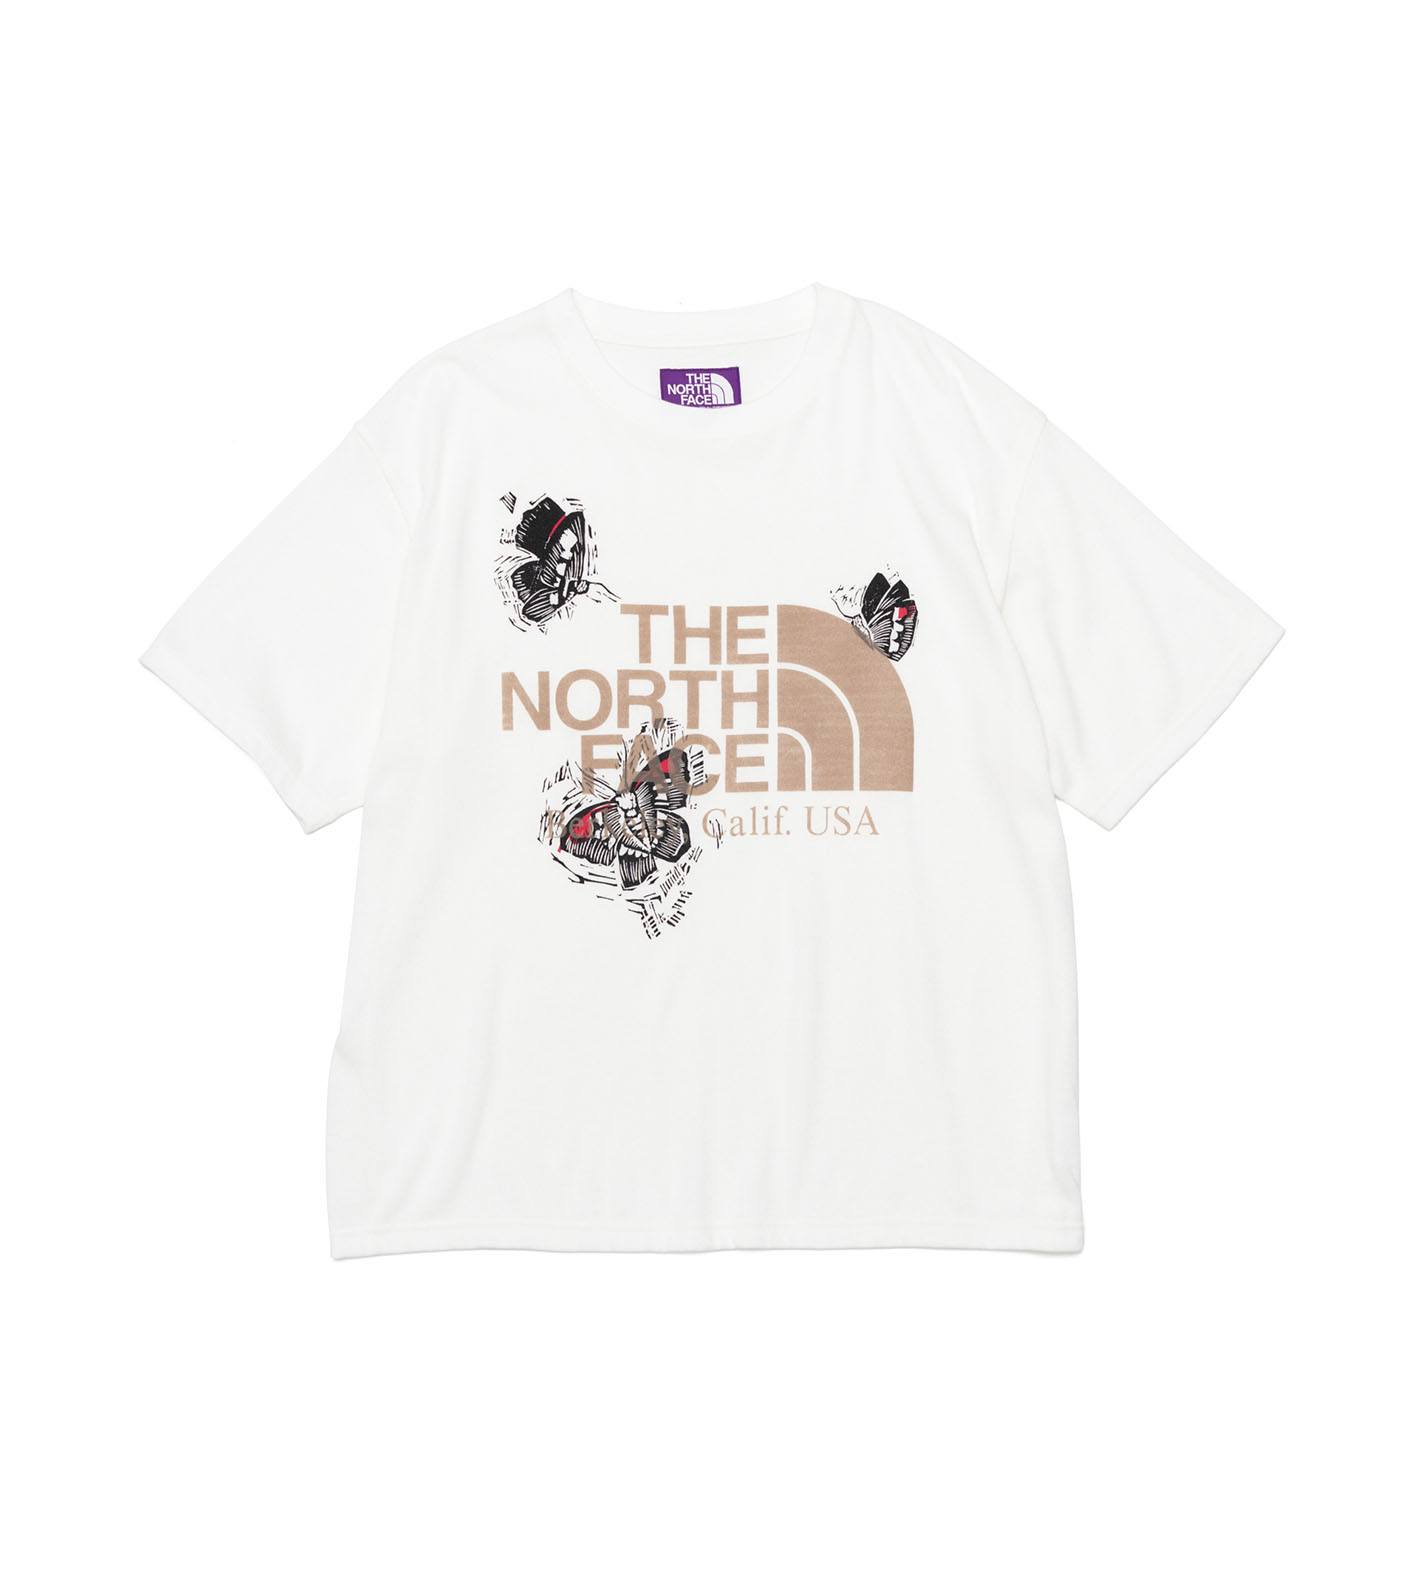 THE NORTH FACE Tシャツアートワーク